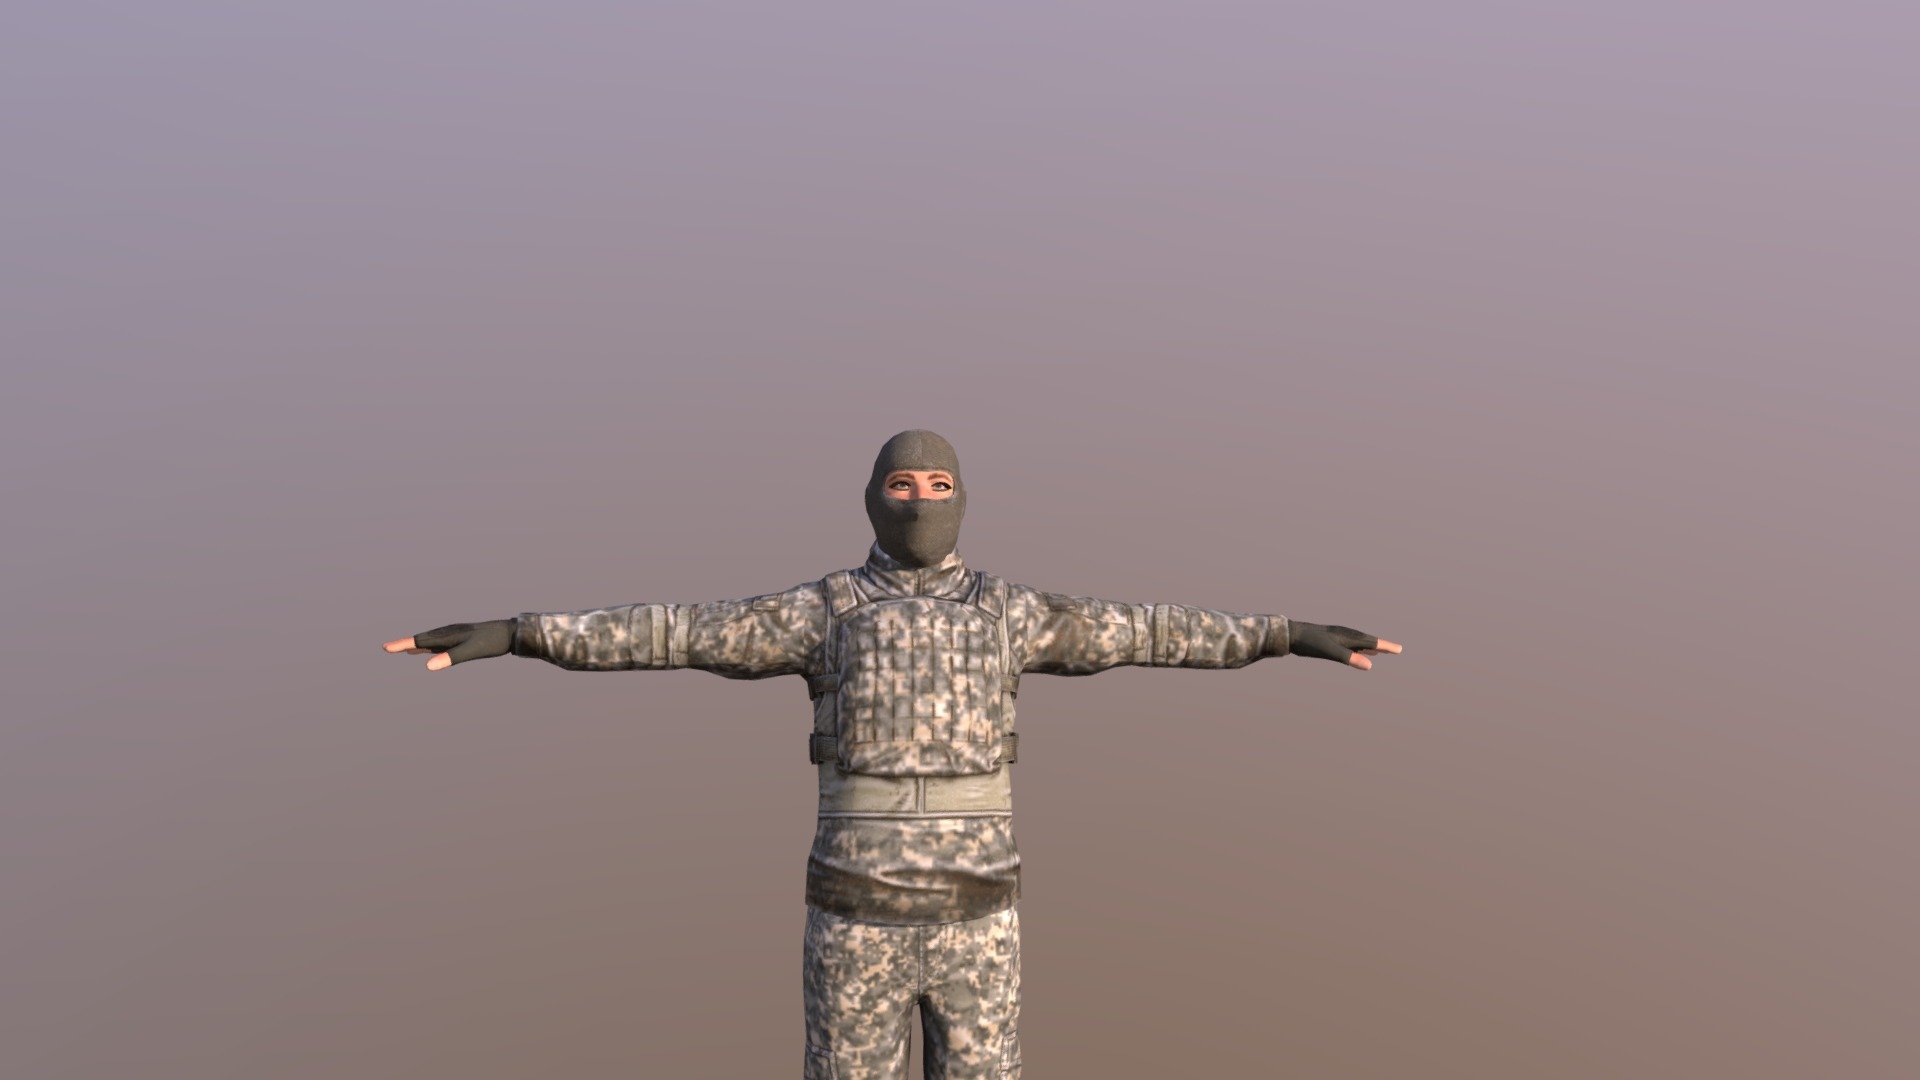 Terrorist Soldier 3D Model By Udara Sampath
Please follow me for more 3d models and animations. To get your custom model contact me here - https://www.fiverr.com/users/udara_sampath/ 
my website - www.techudara.blogspot.com - Terrorist Soldier - Download Free 3D model by Udara Sampath (@Udara.Sampath) 3d model